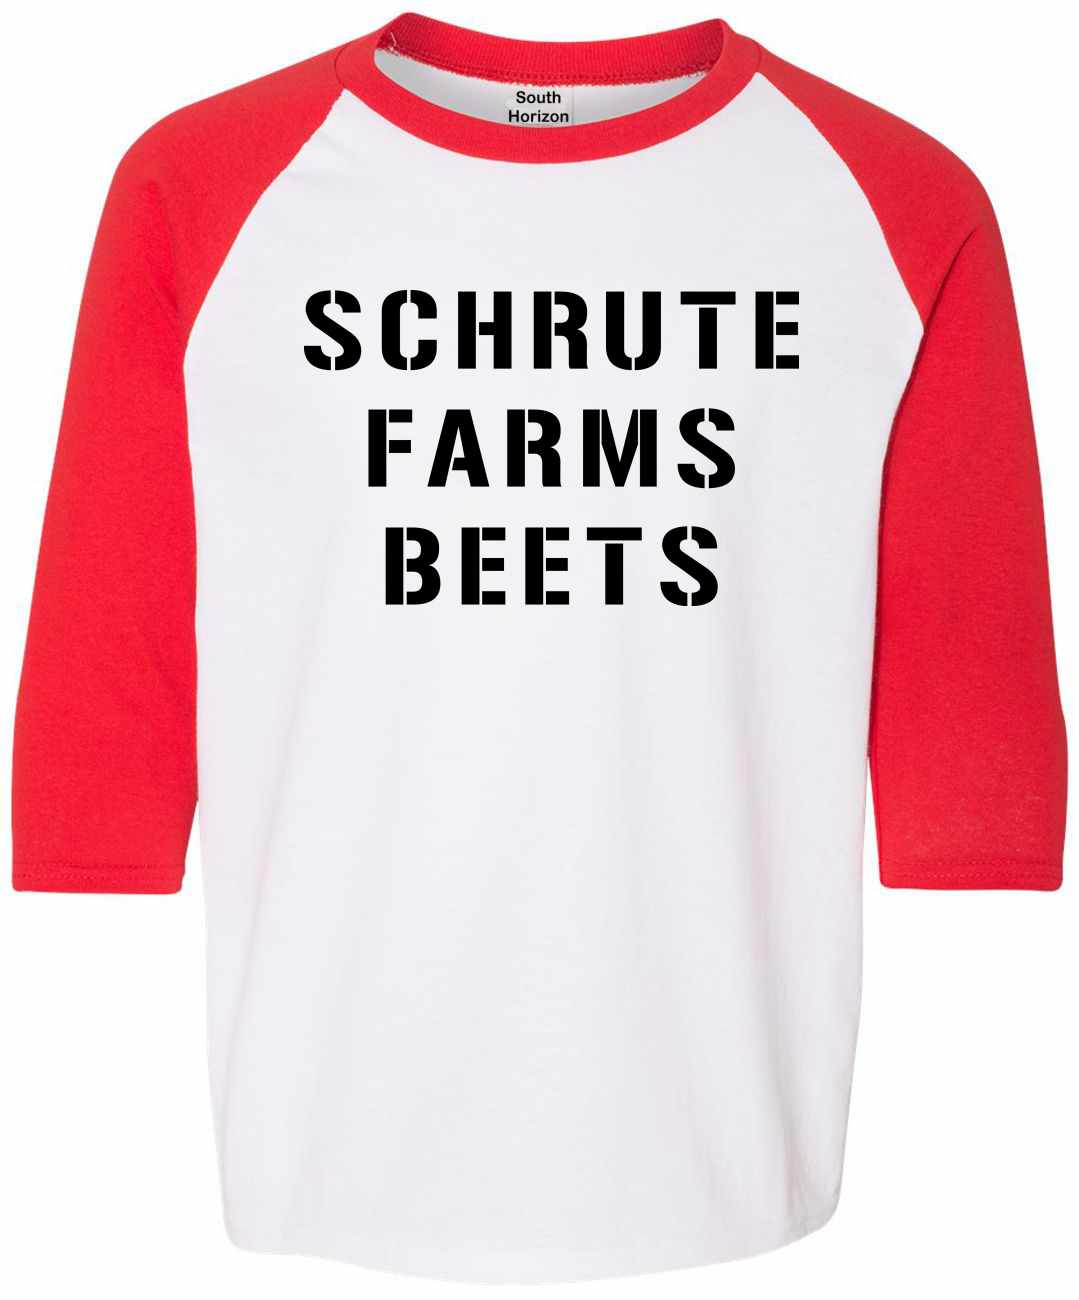 SCHRUTE FARMS BEETS on Youth Baseball Shirt